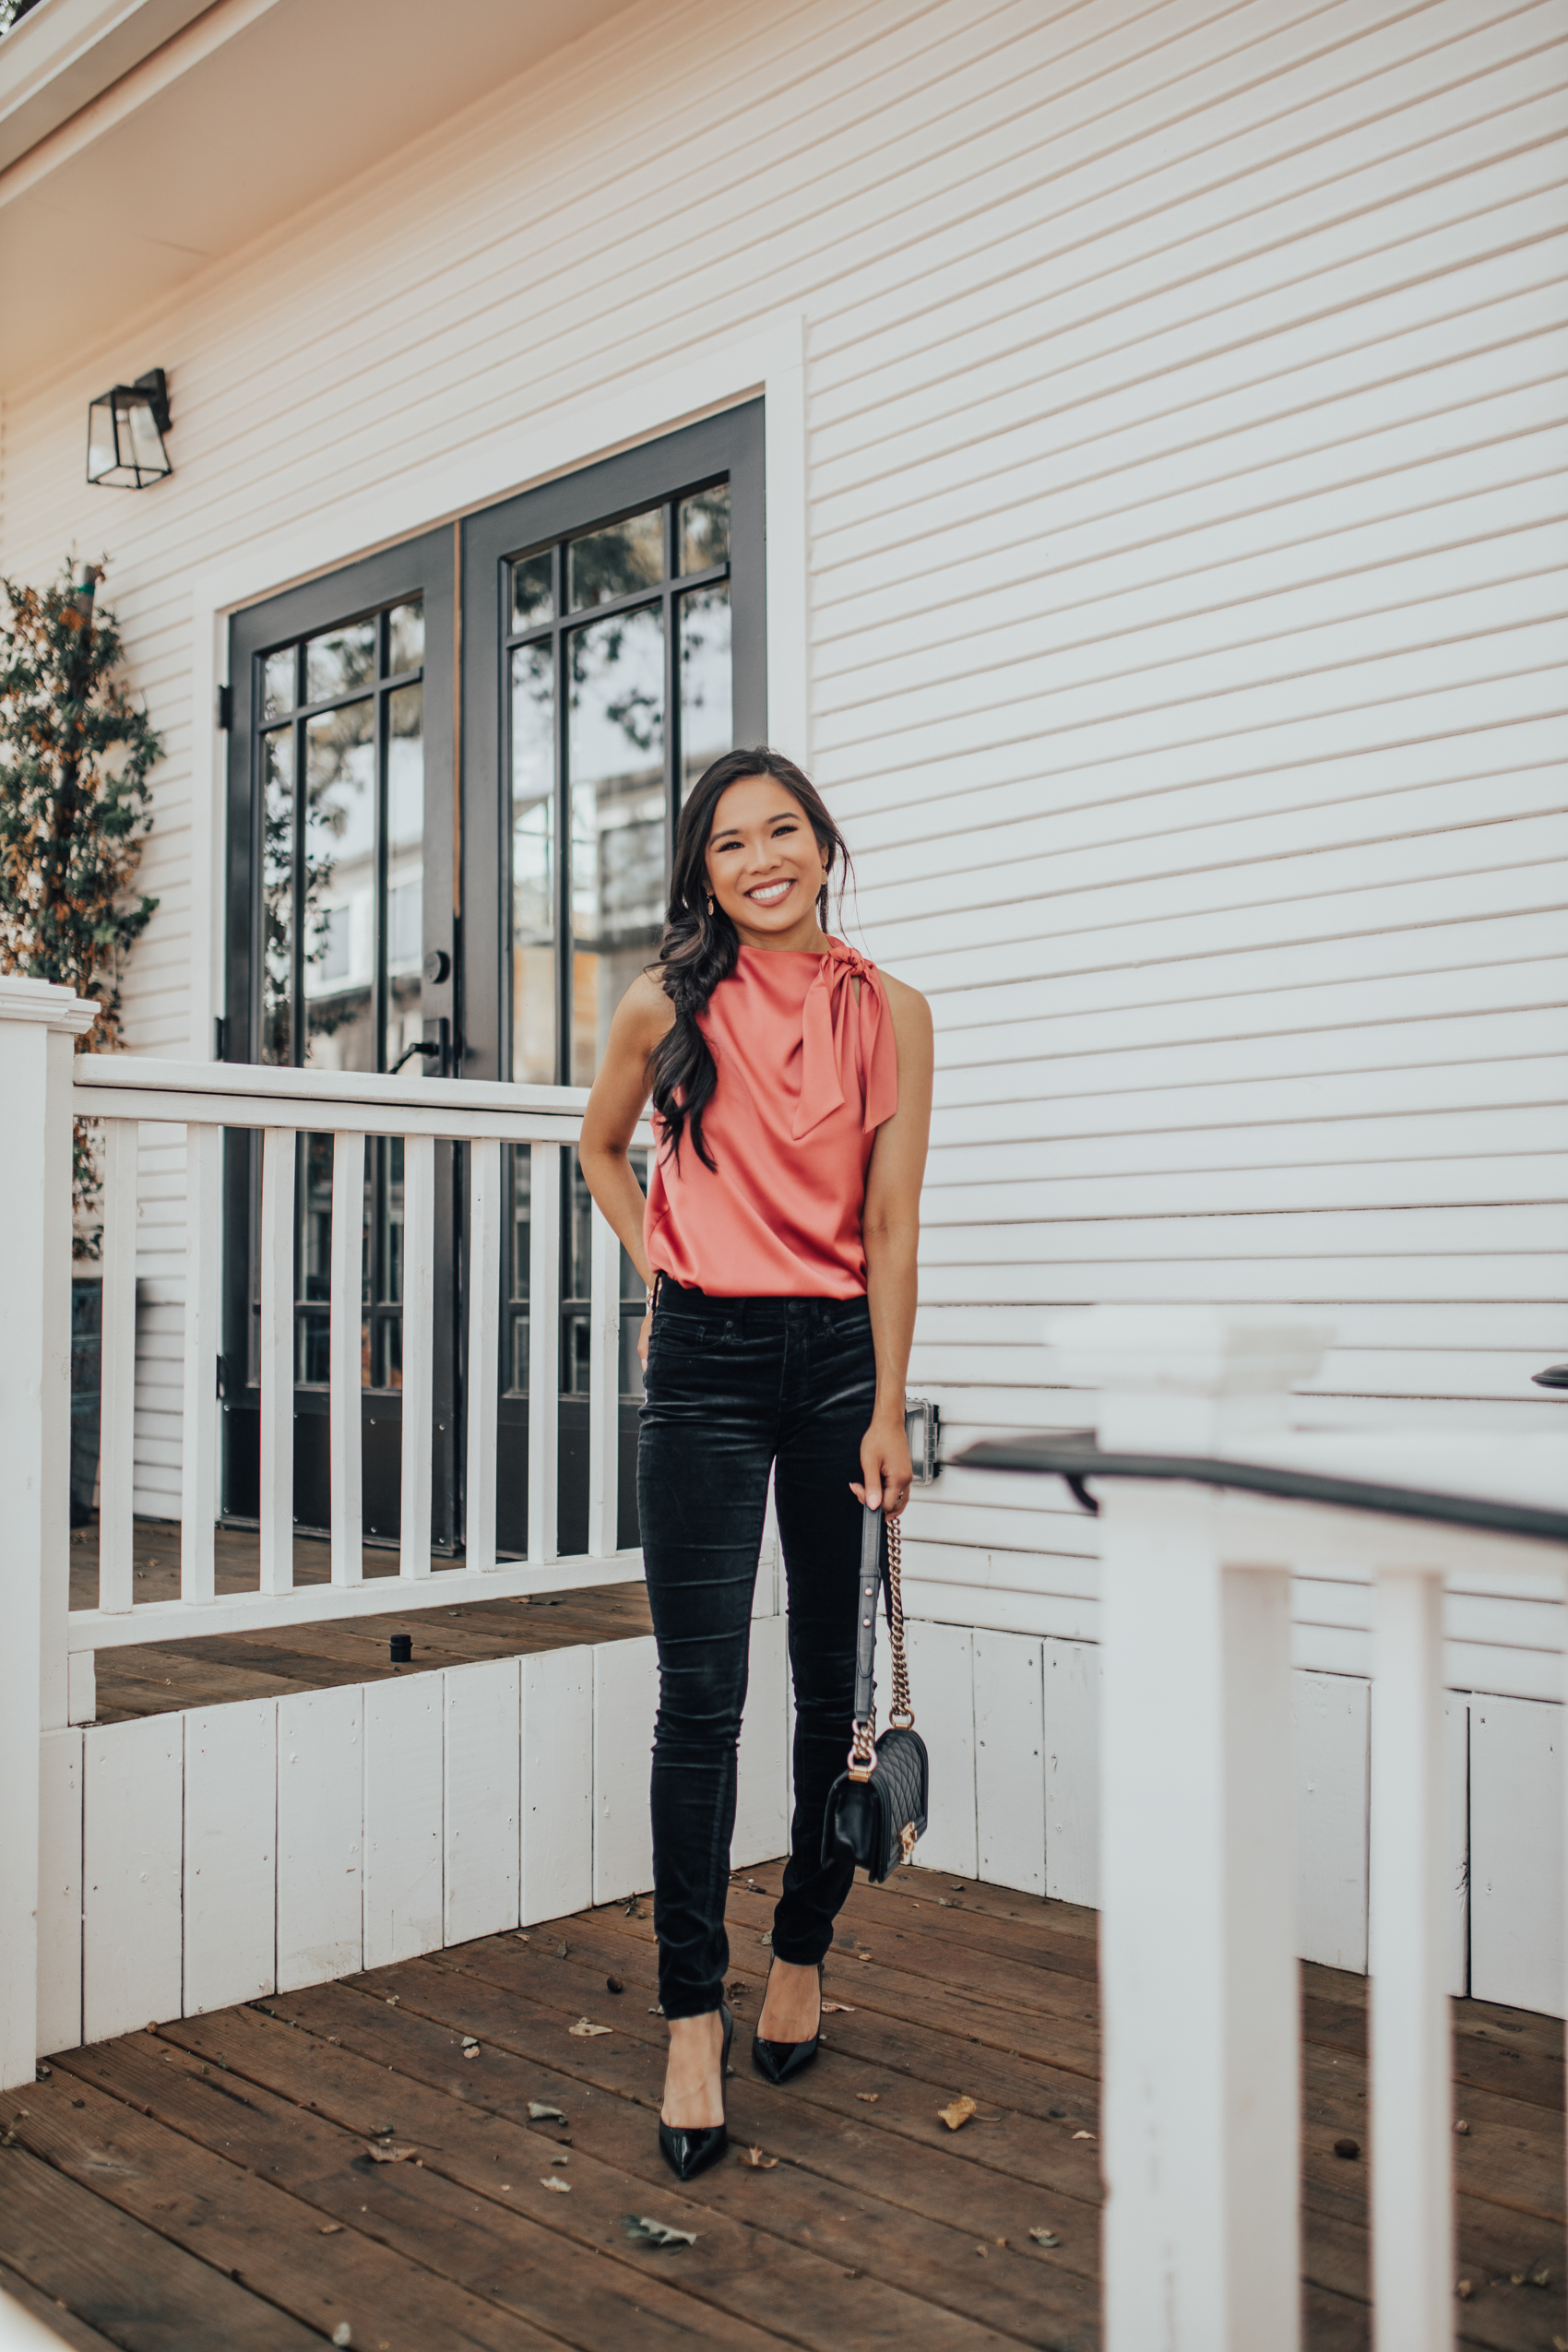 Fall outfits with black velvet skinny pants and satin top with a messy braid